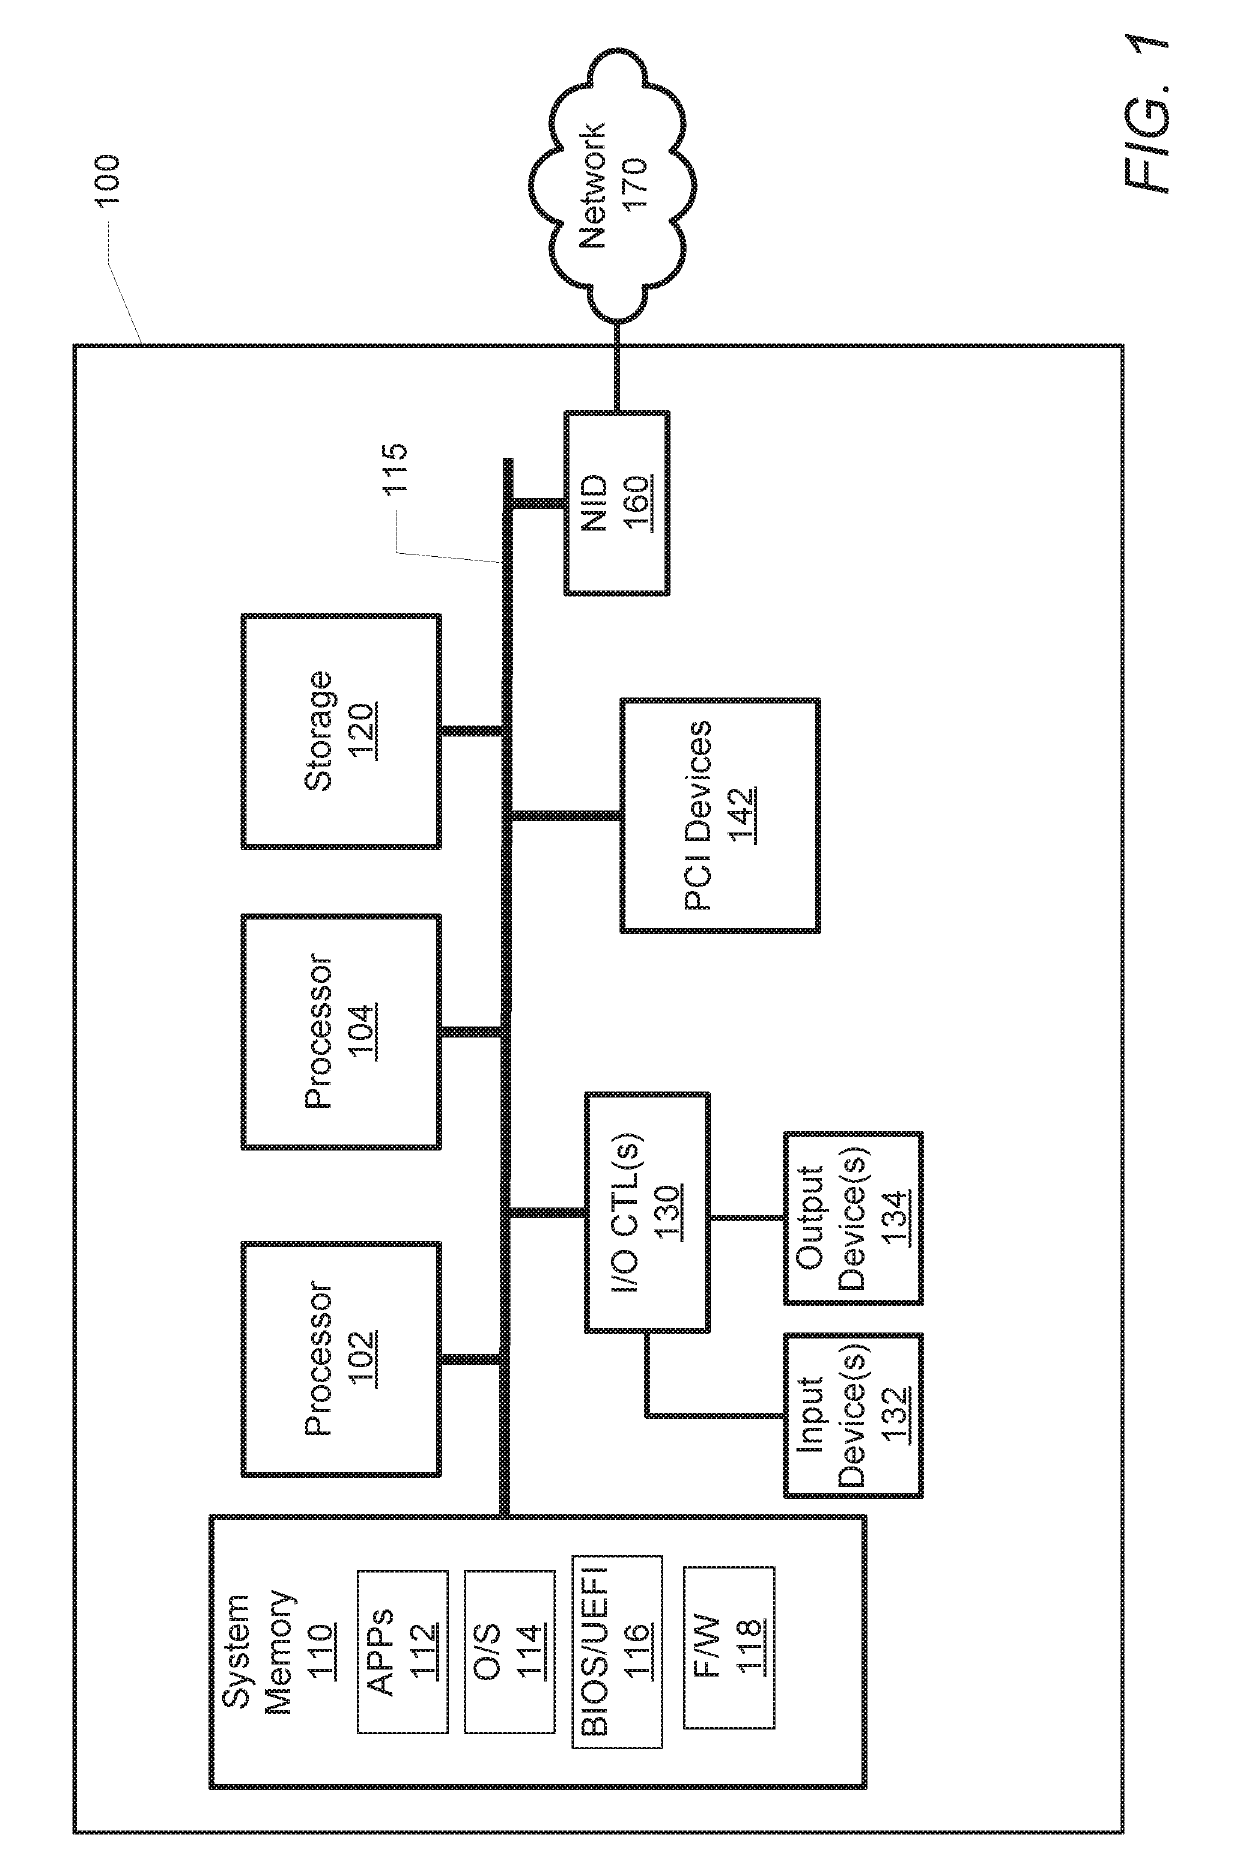 System and method for virtual link trunking